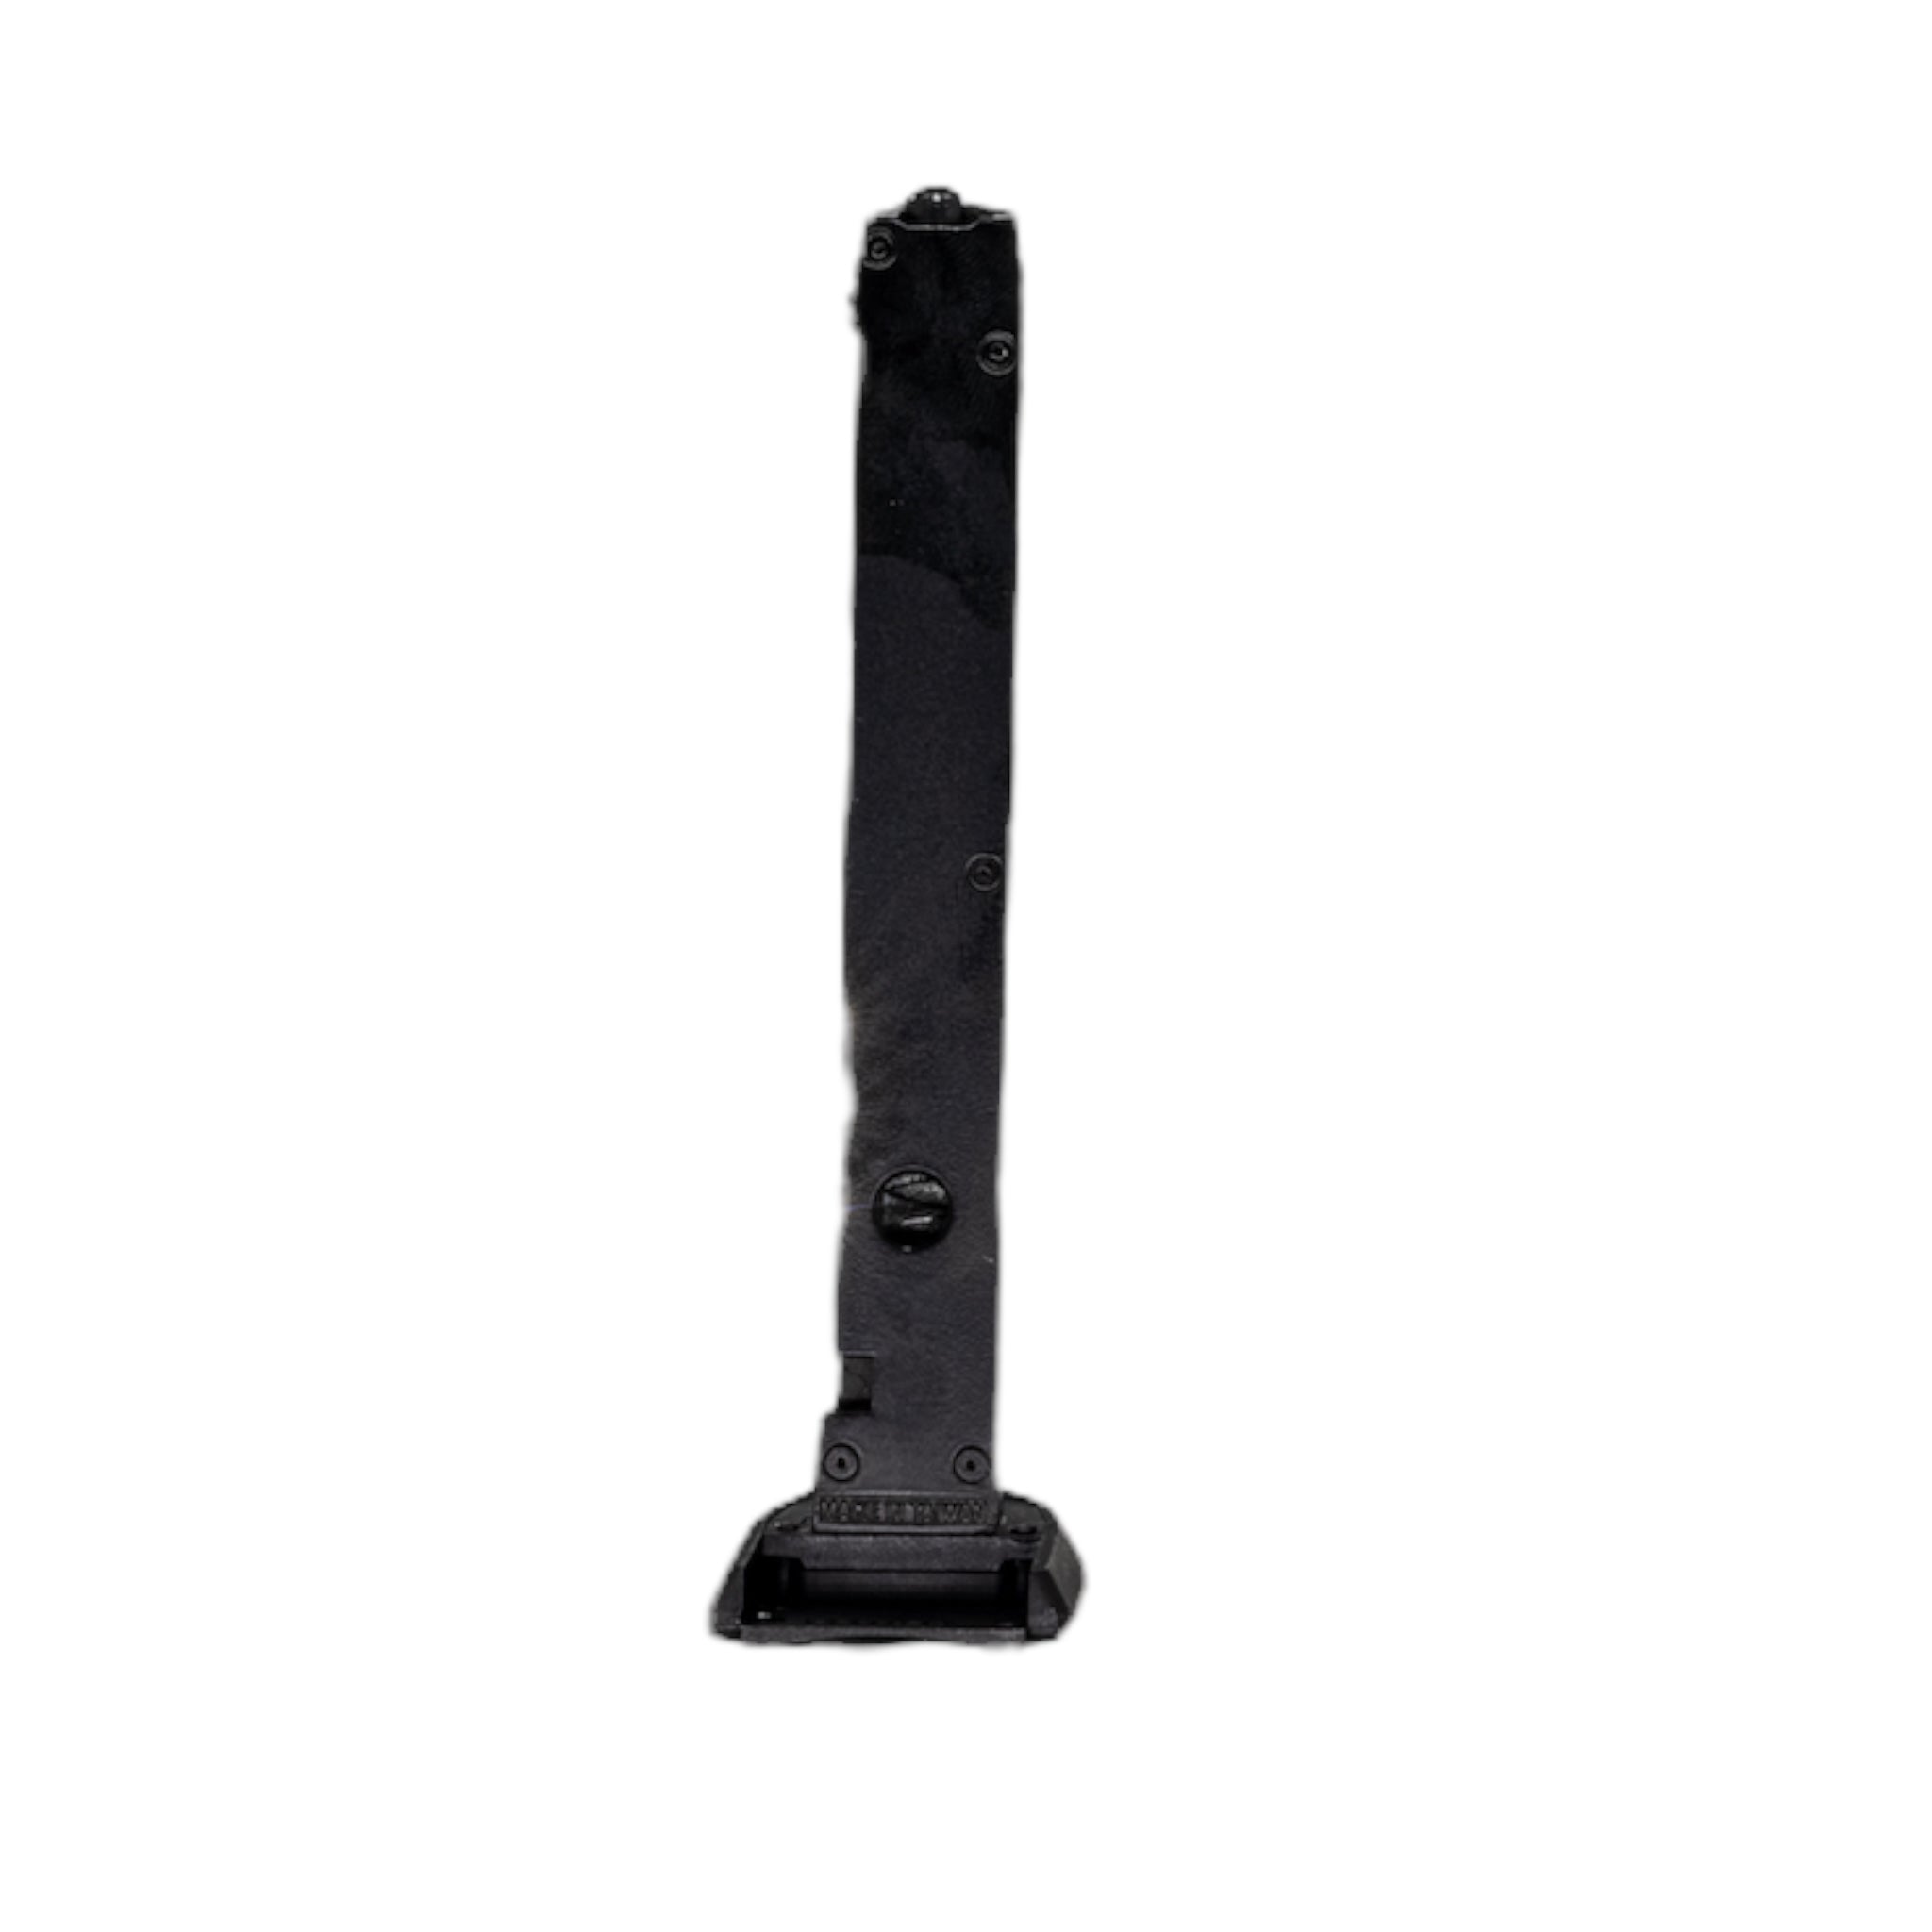 Elite Force Walther P99 CO2 Airsoft Pistol Magazine - ssairsoft.com